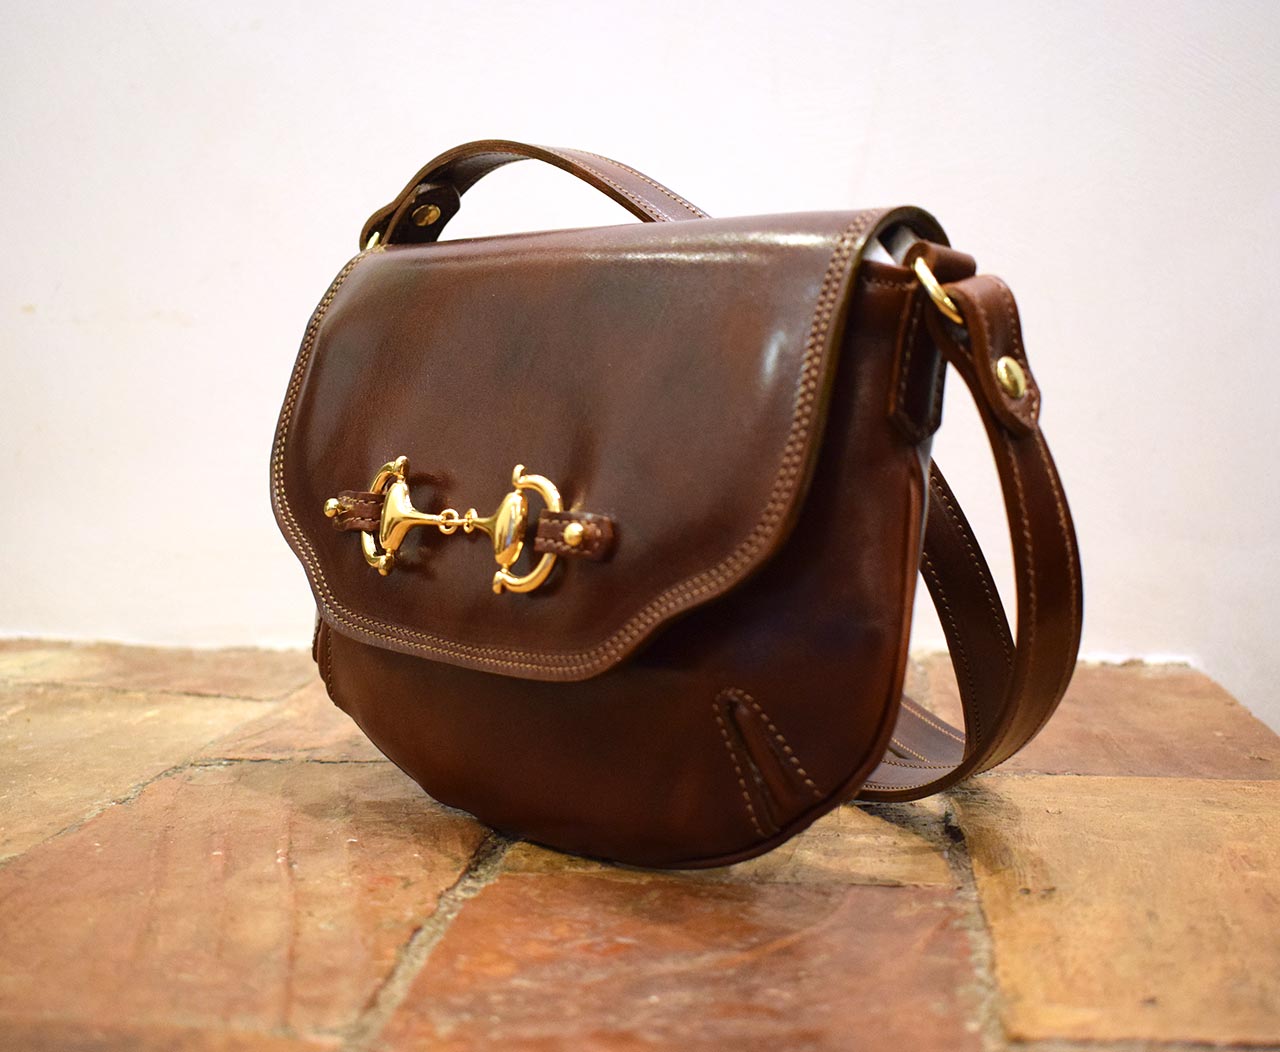 Muse, Italian Leather Handmade Purse by Mancini Leather Since 1918